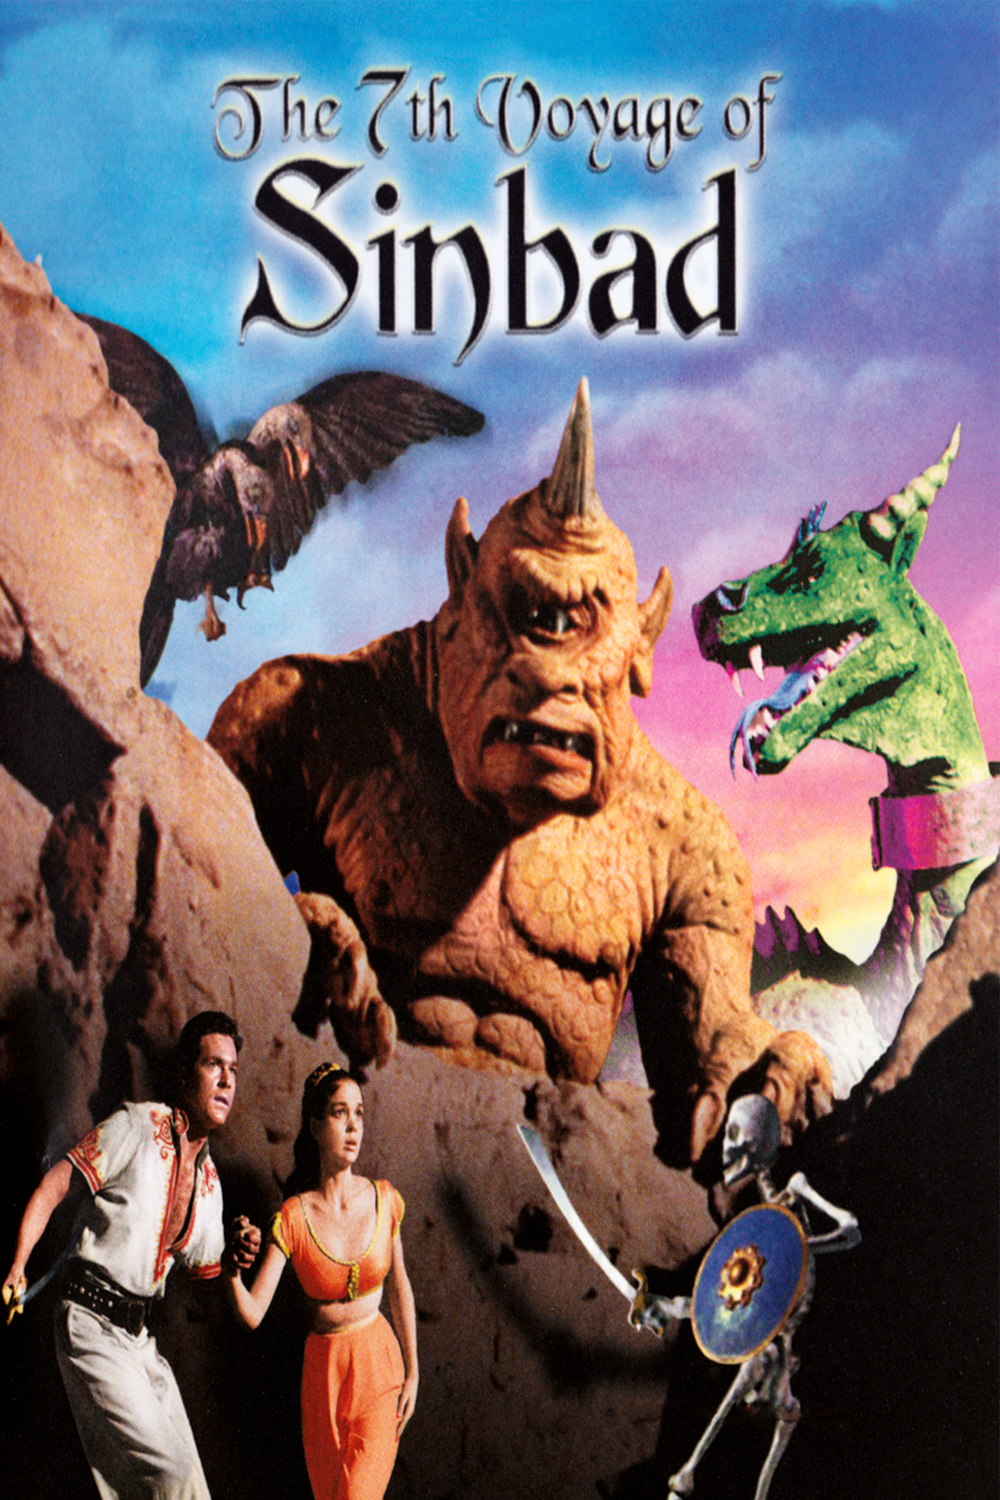 Poster for the movie "The 7th Voyage of Sinbad"